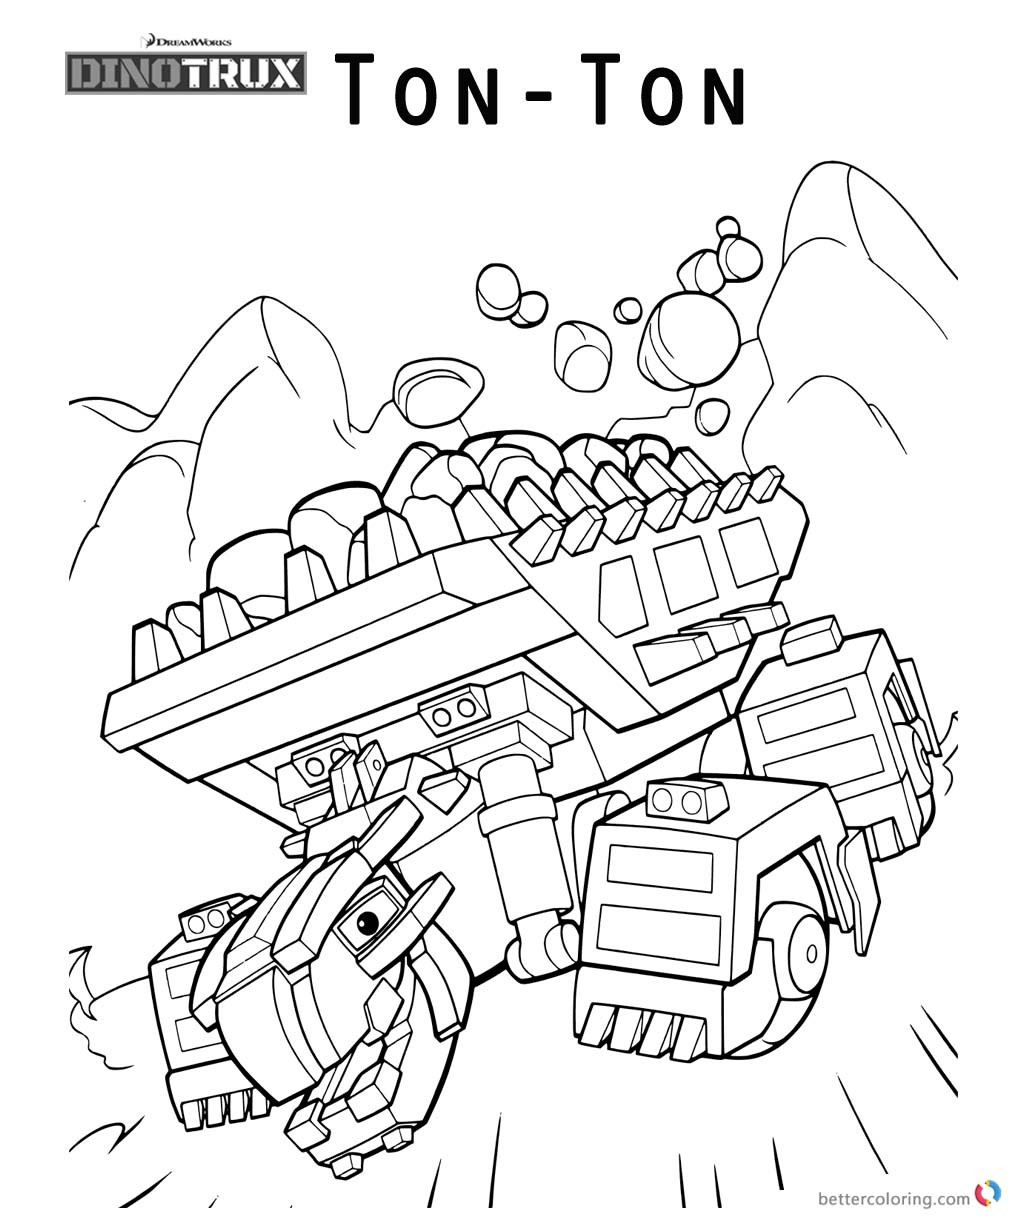 Dinotrux Coloring Pages
 Dinotrux Ton Ton coloring pages Free Printable Coloring